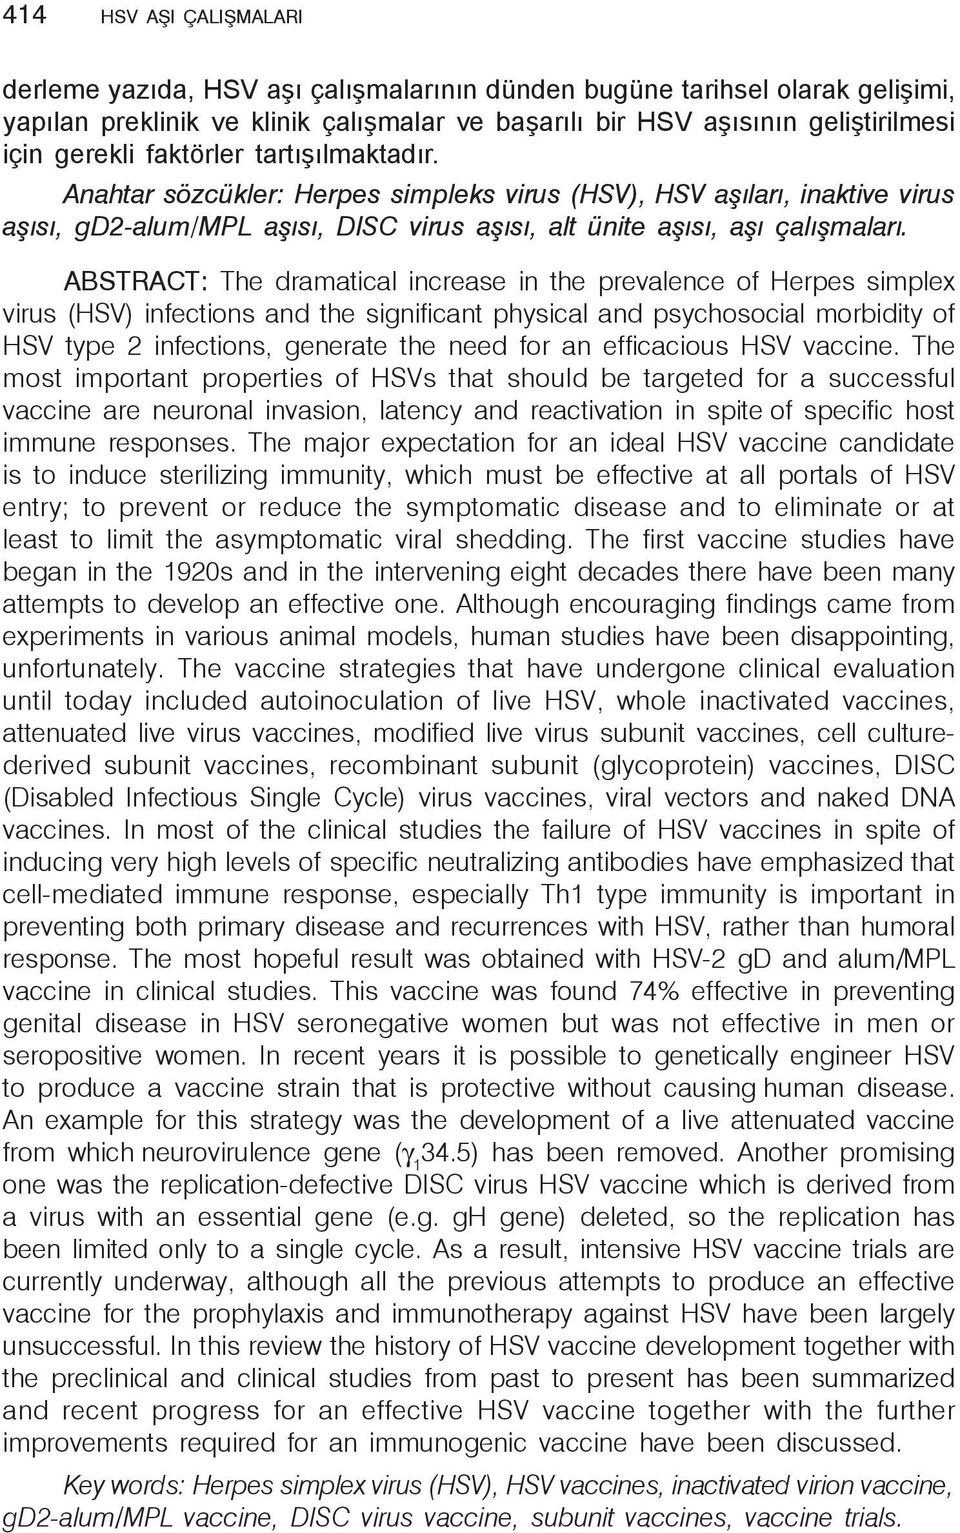 ABSTRACT: The dramatical increase in the prevalence of Herpes simplex virus (HSV) infections and the significant physical and psychosocial morbidity of HSV type 2 infections, generate the need for an